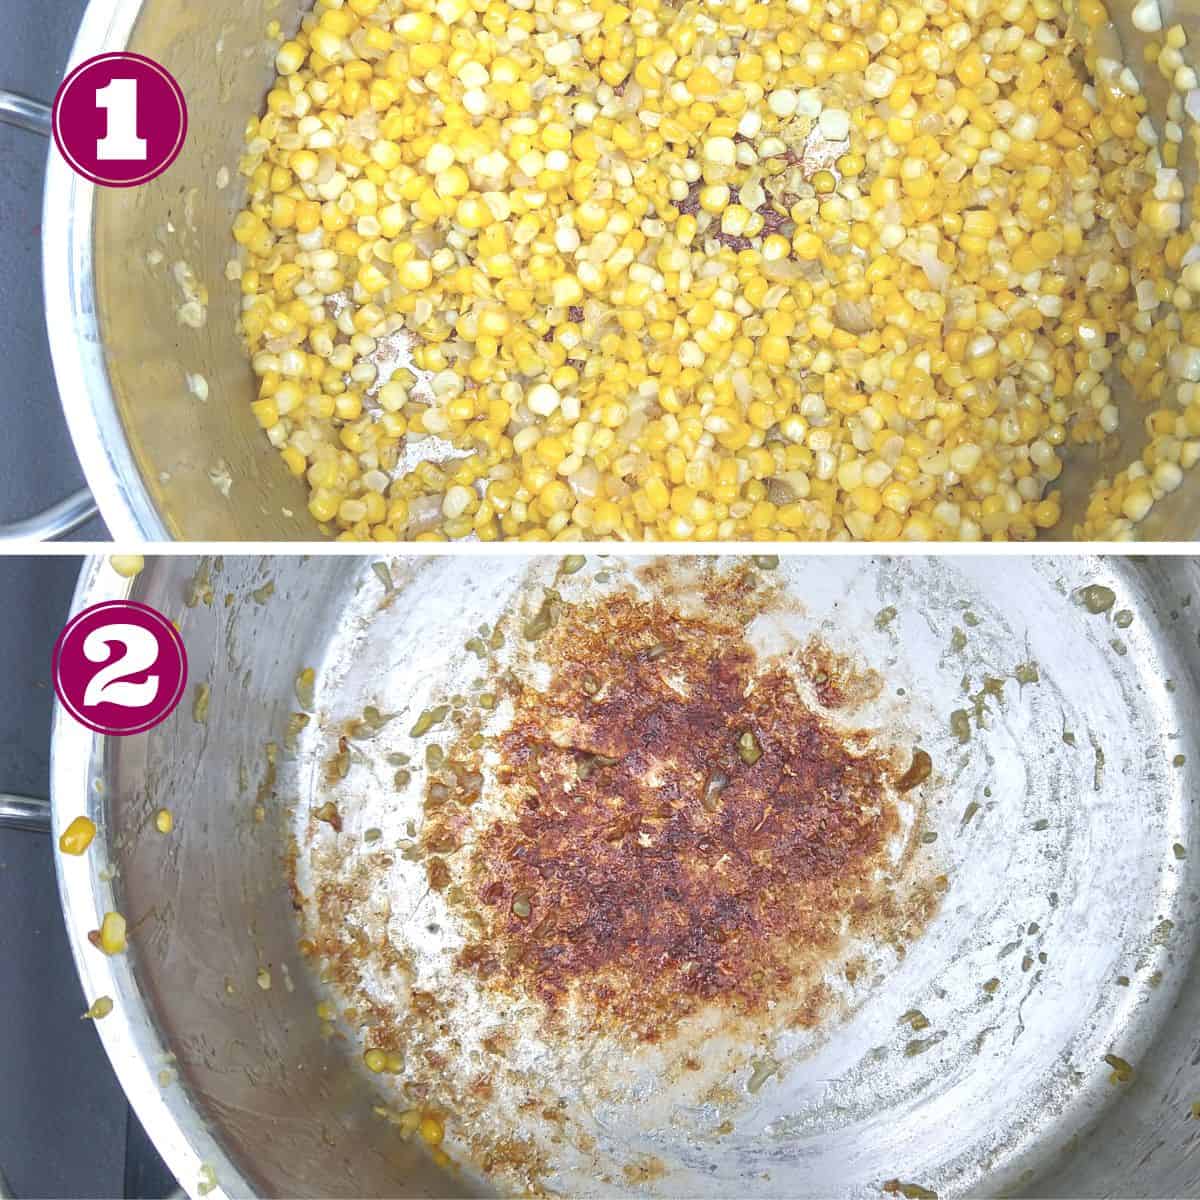 Step 1 shows the corn and other veggies in a pot.
Step 2 shows the brown bites that stuck to the bottom of the pot.